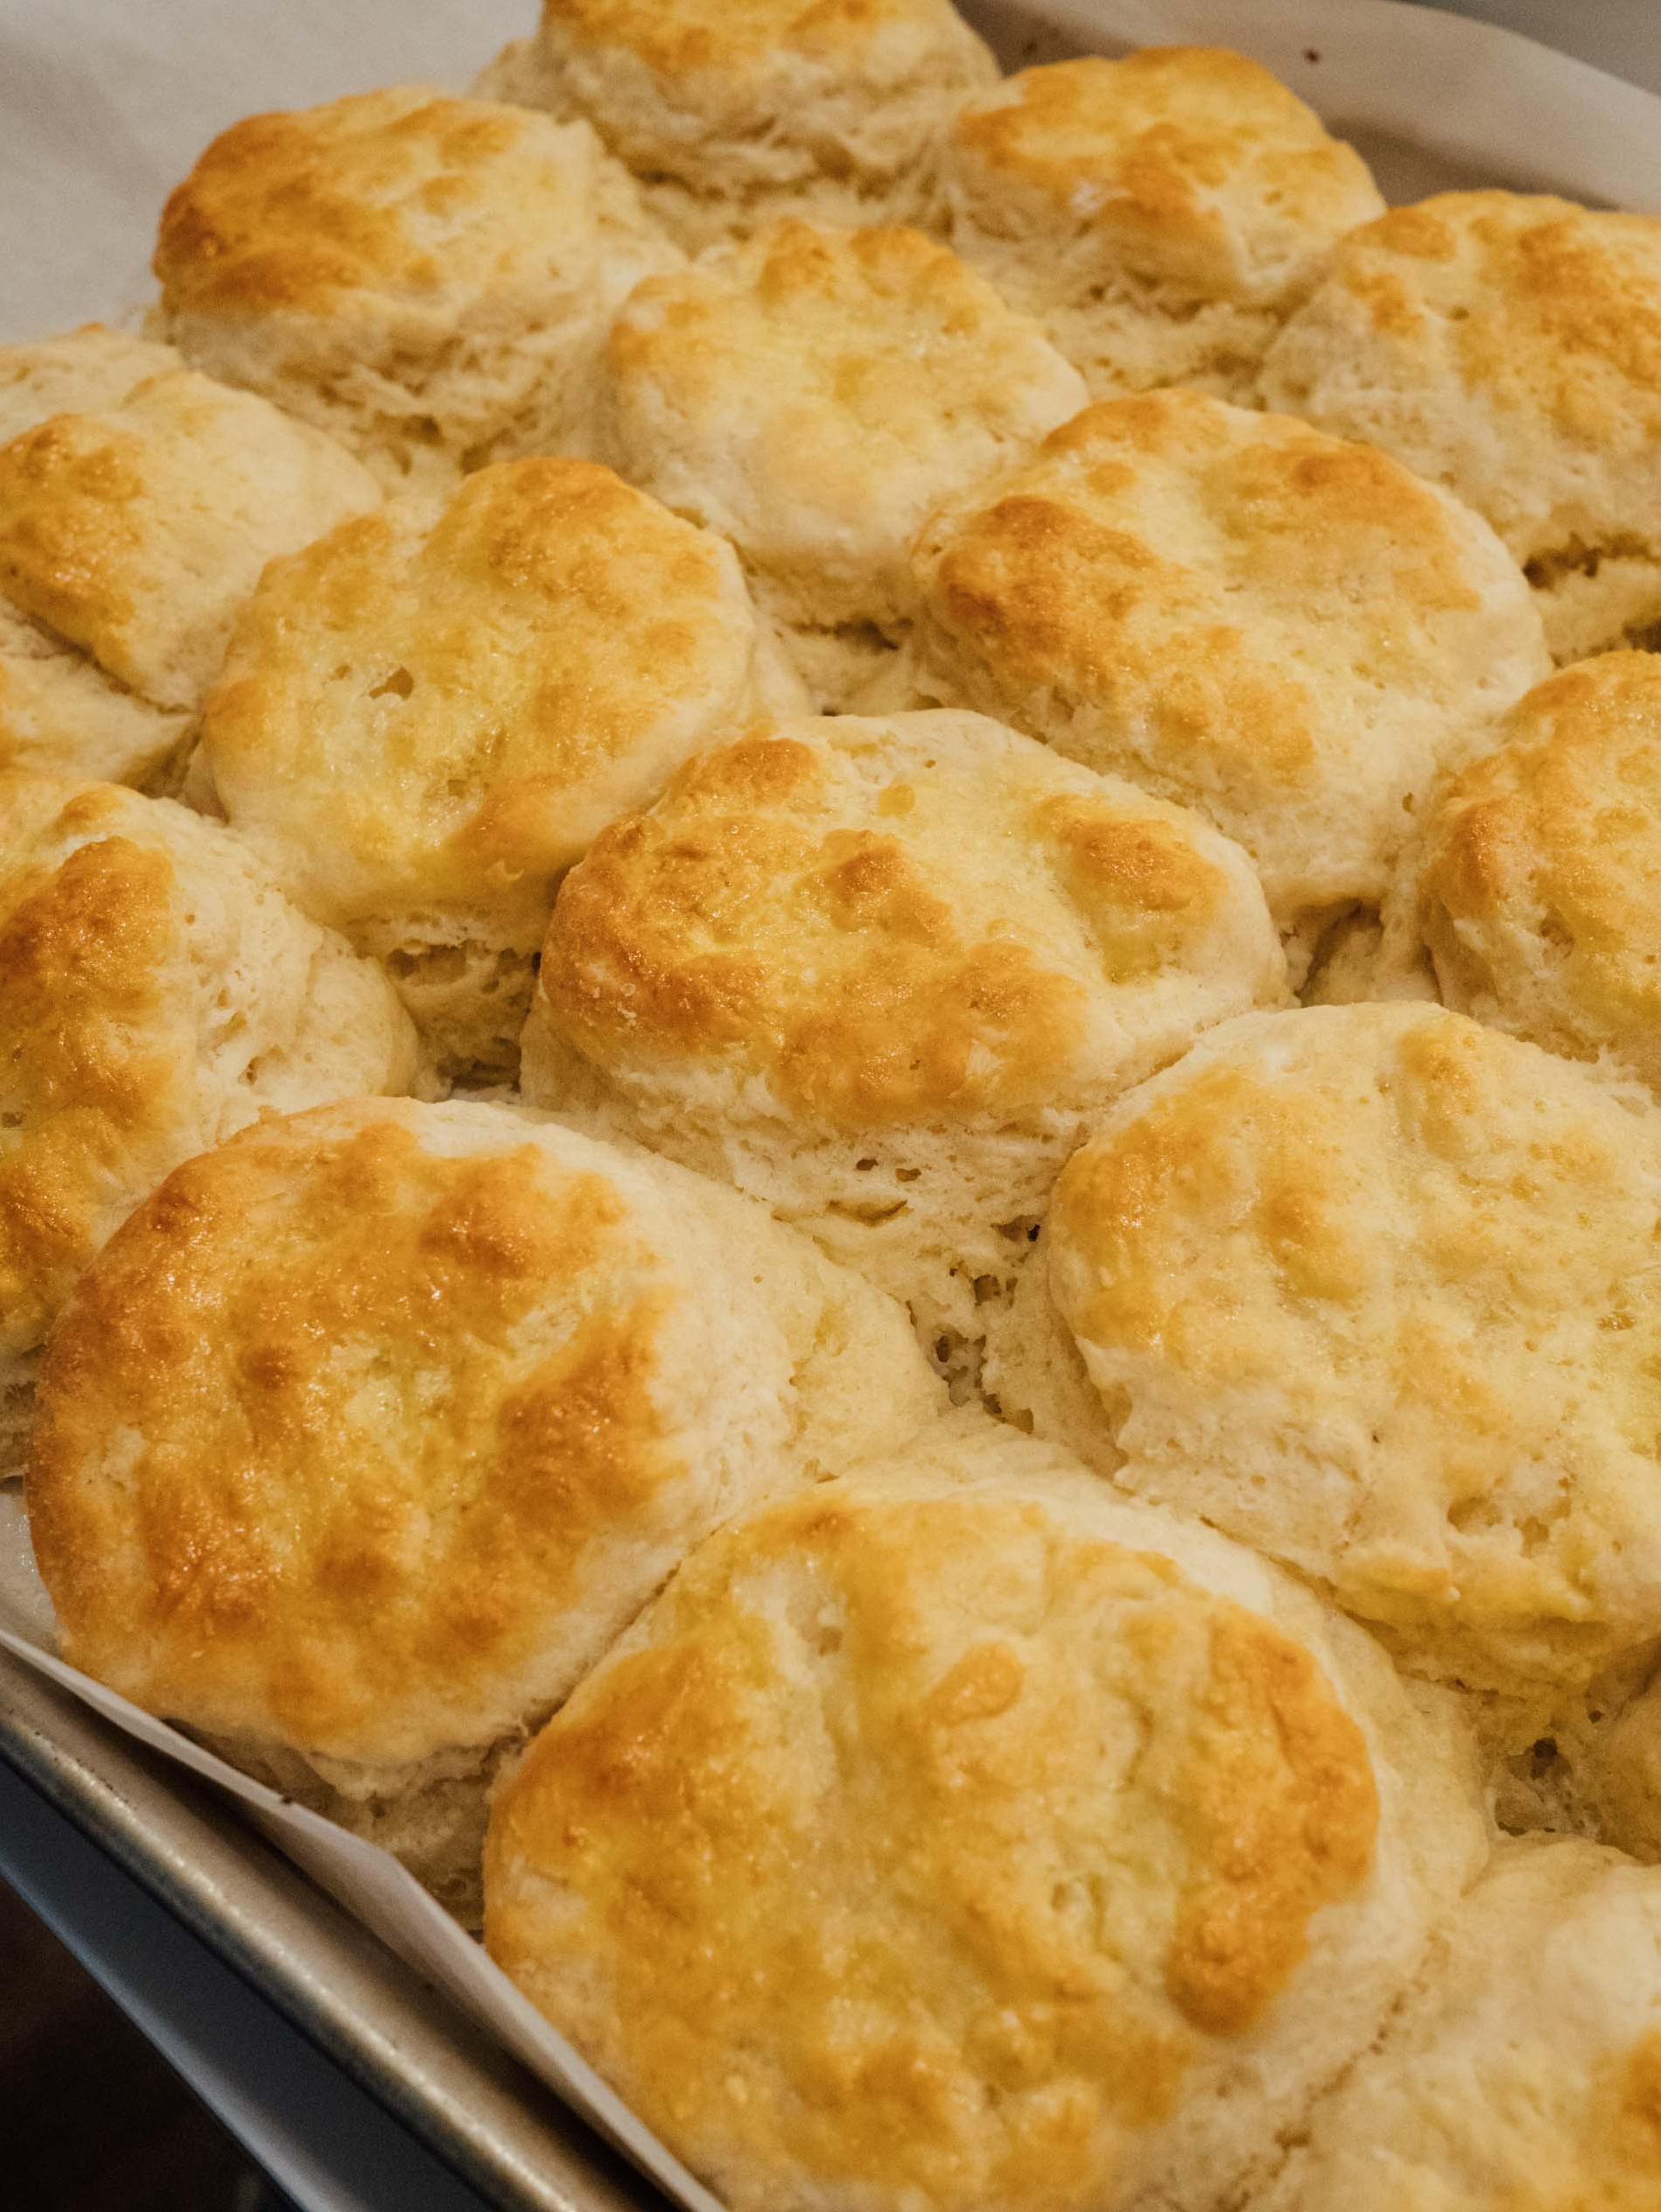  These melt-in-your-mouth biscuits are impossible to resist.